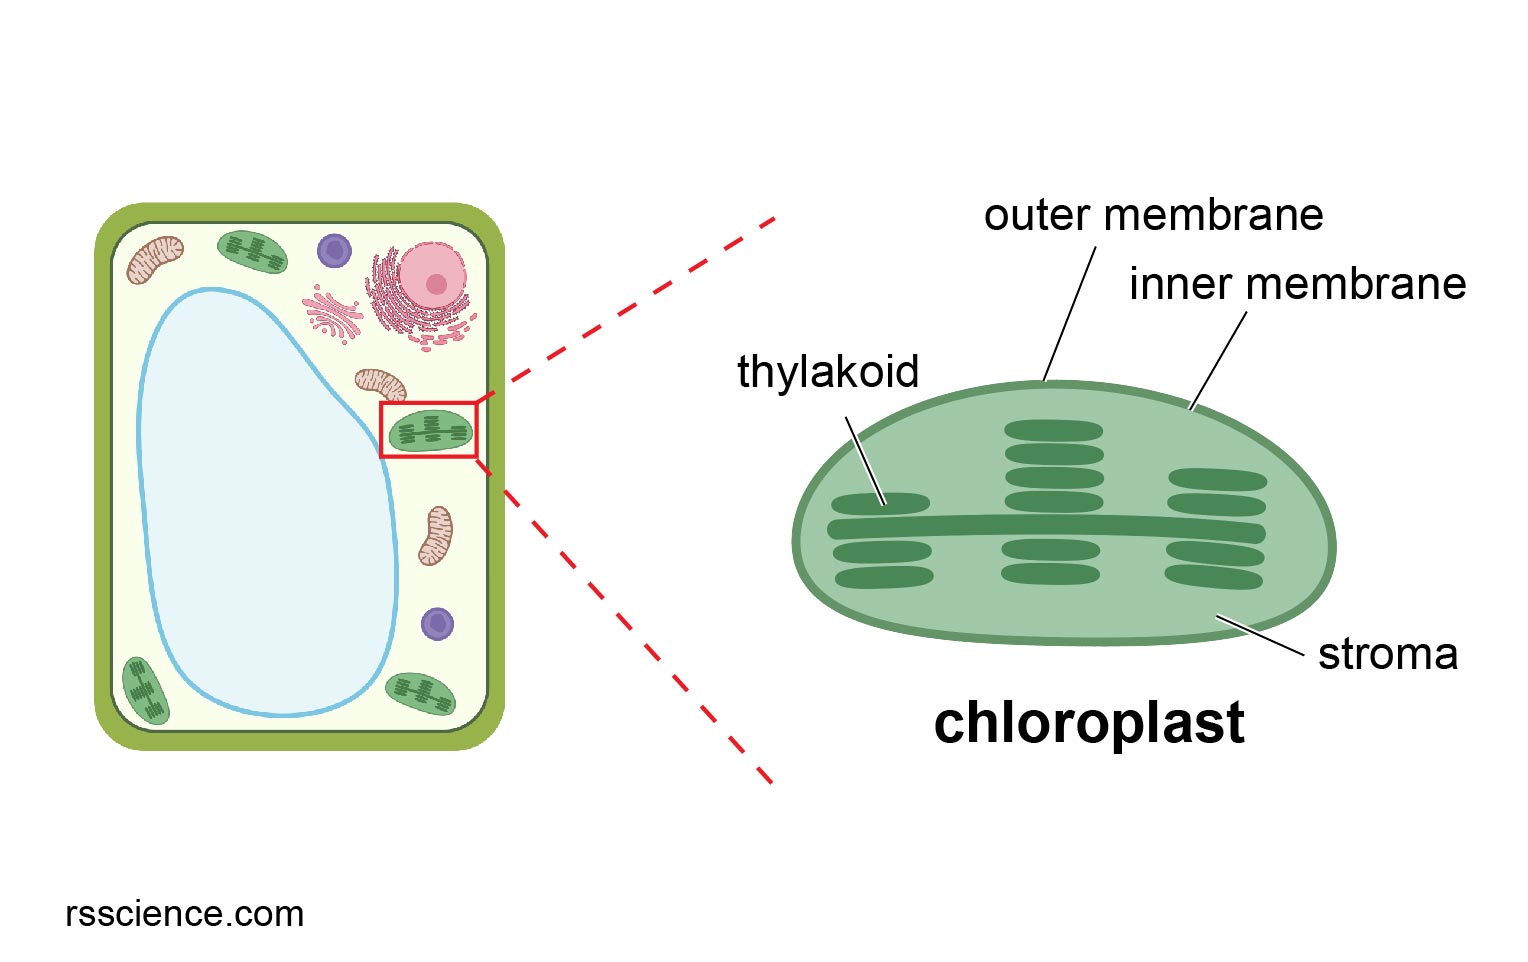 chloroplast-in-the-cell-and-its-structure